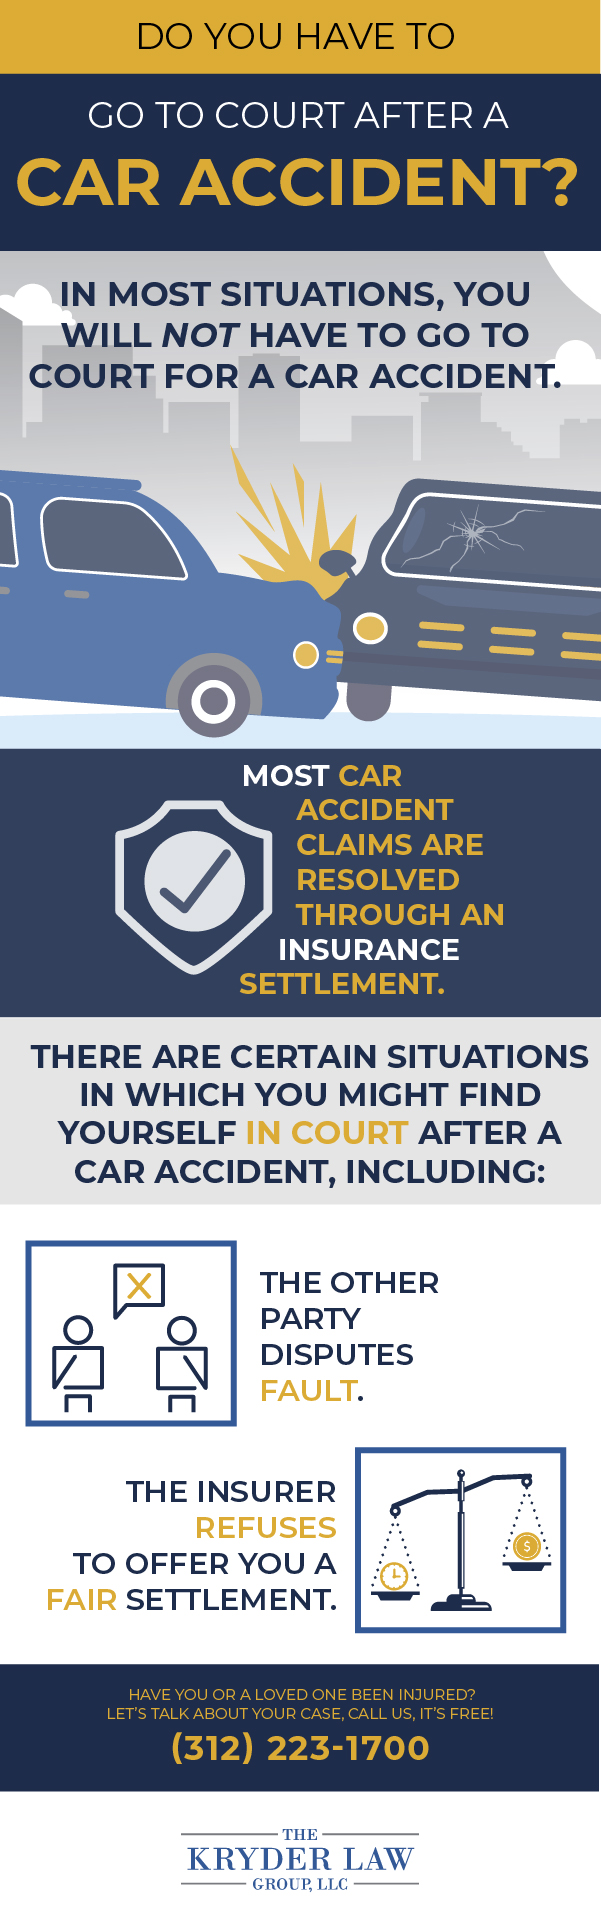 Do You Have to Go to Court for a Car Accident - Infographic